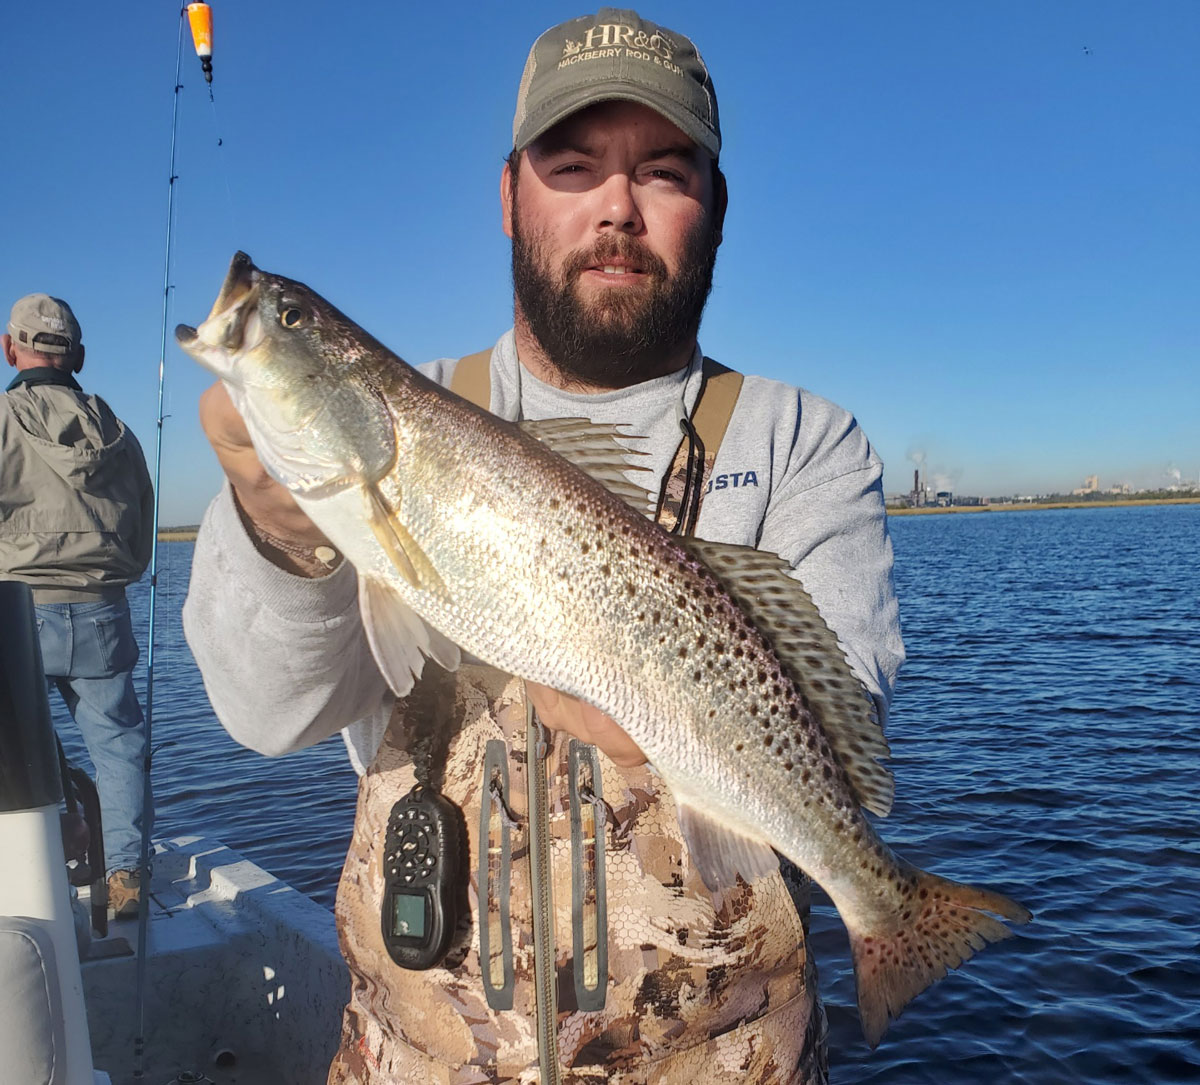 Capt. Brian Windsor is no stranger to catching solid speckled trout. (Photo courtesy Capt. Brian Windsor)